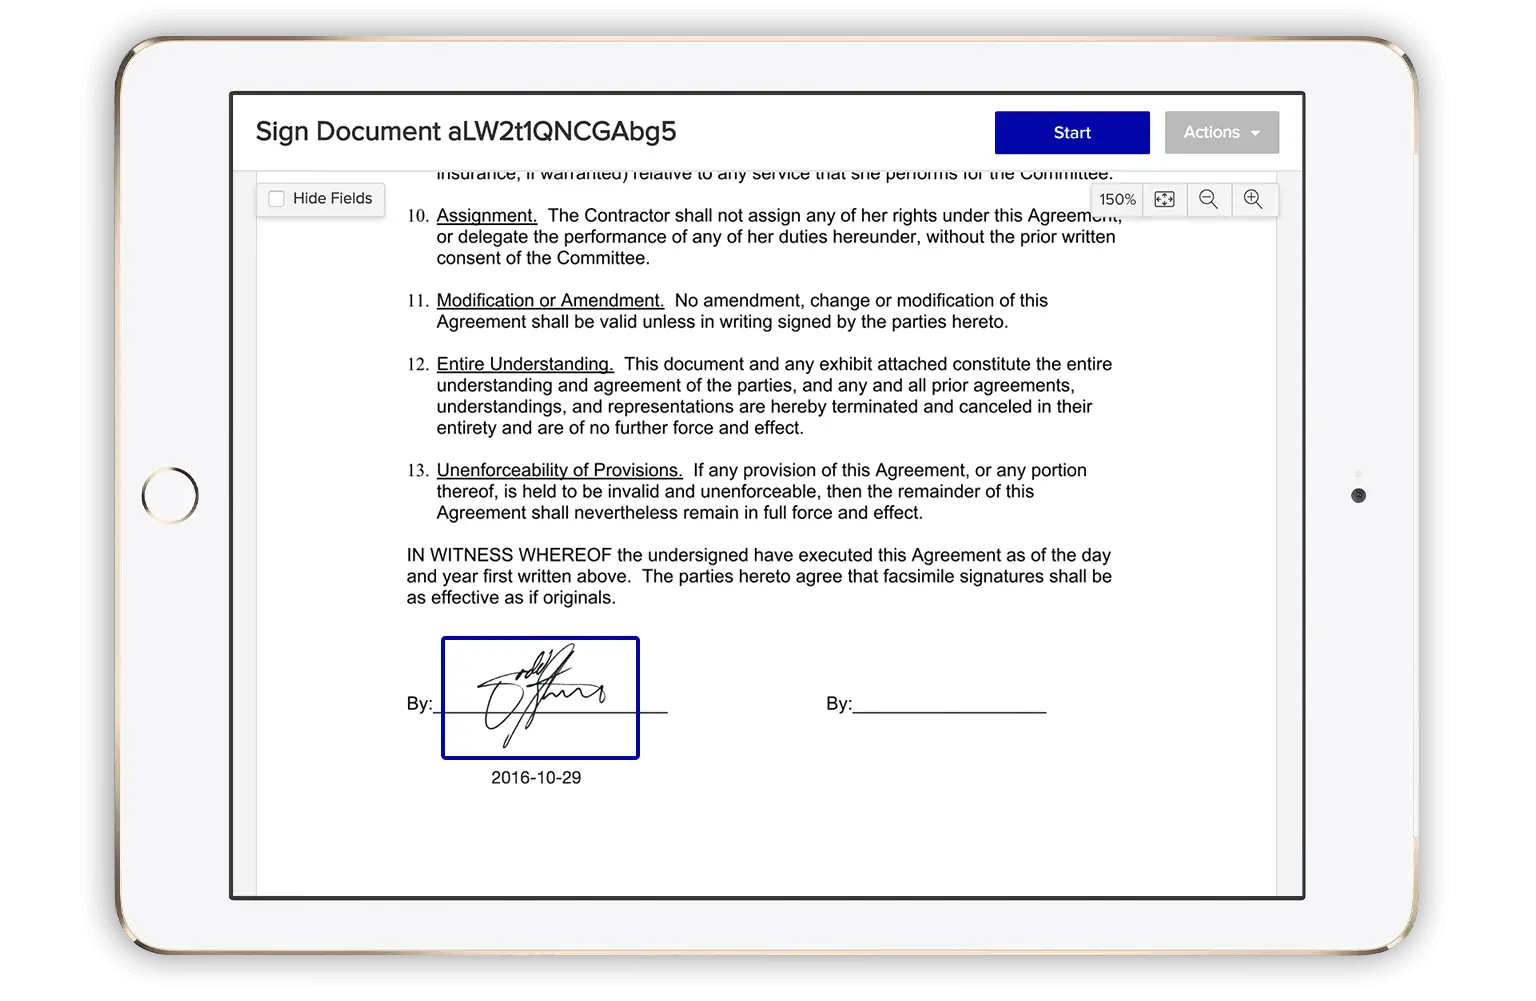 How to e-sign a document